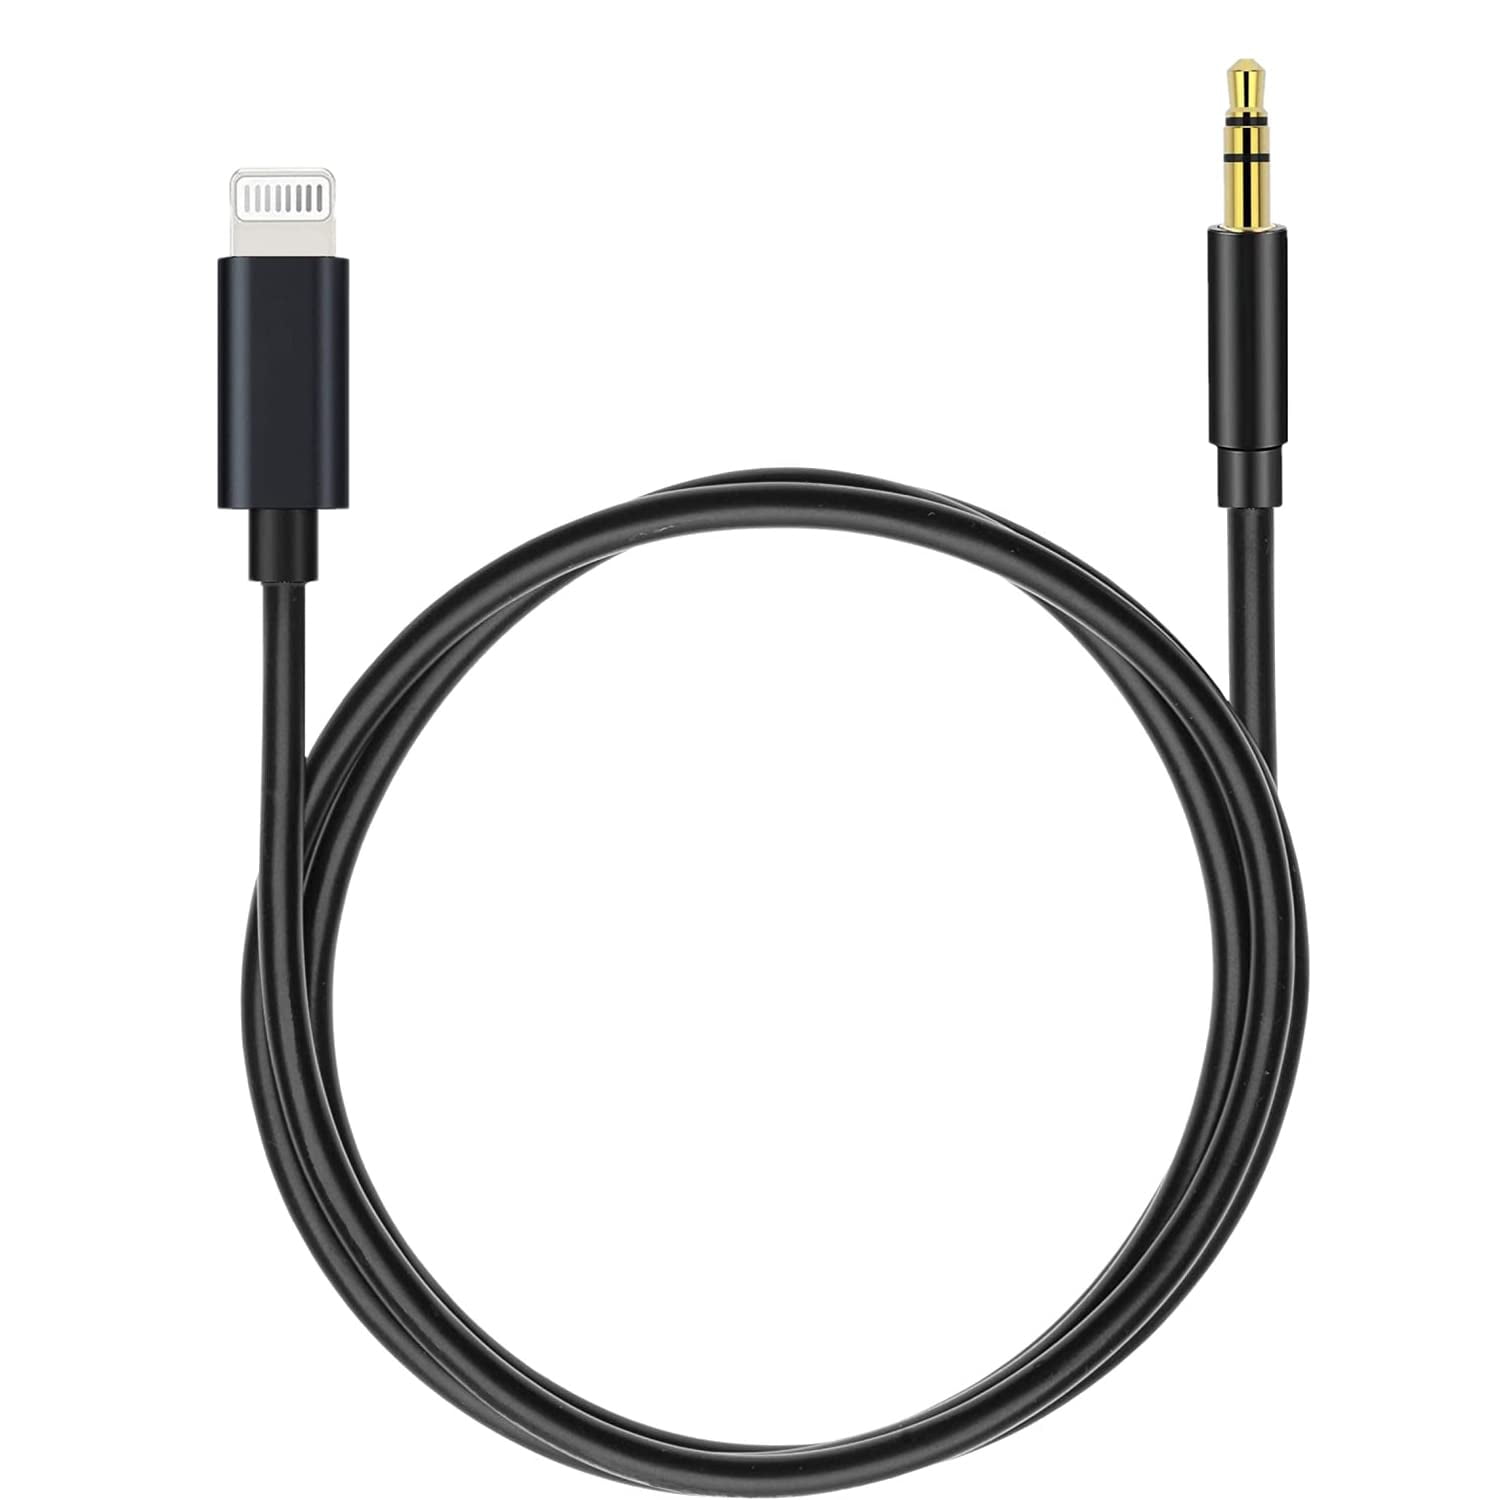 Apple MMX62AM/A 3.5mm Audio Adapter for sale online